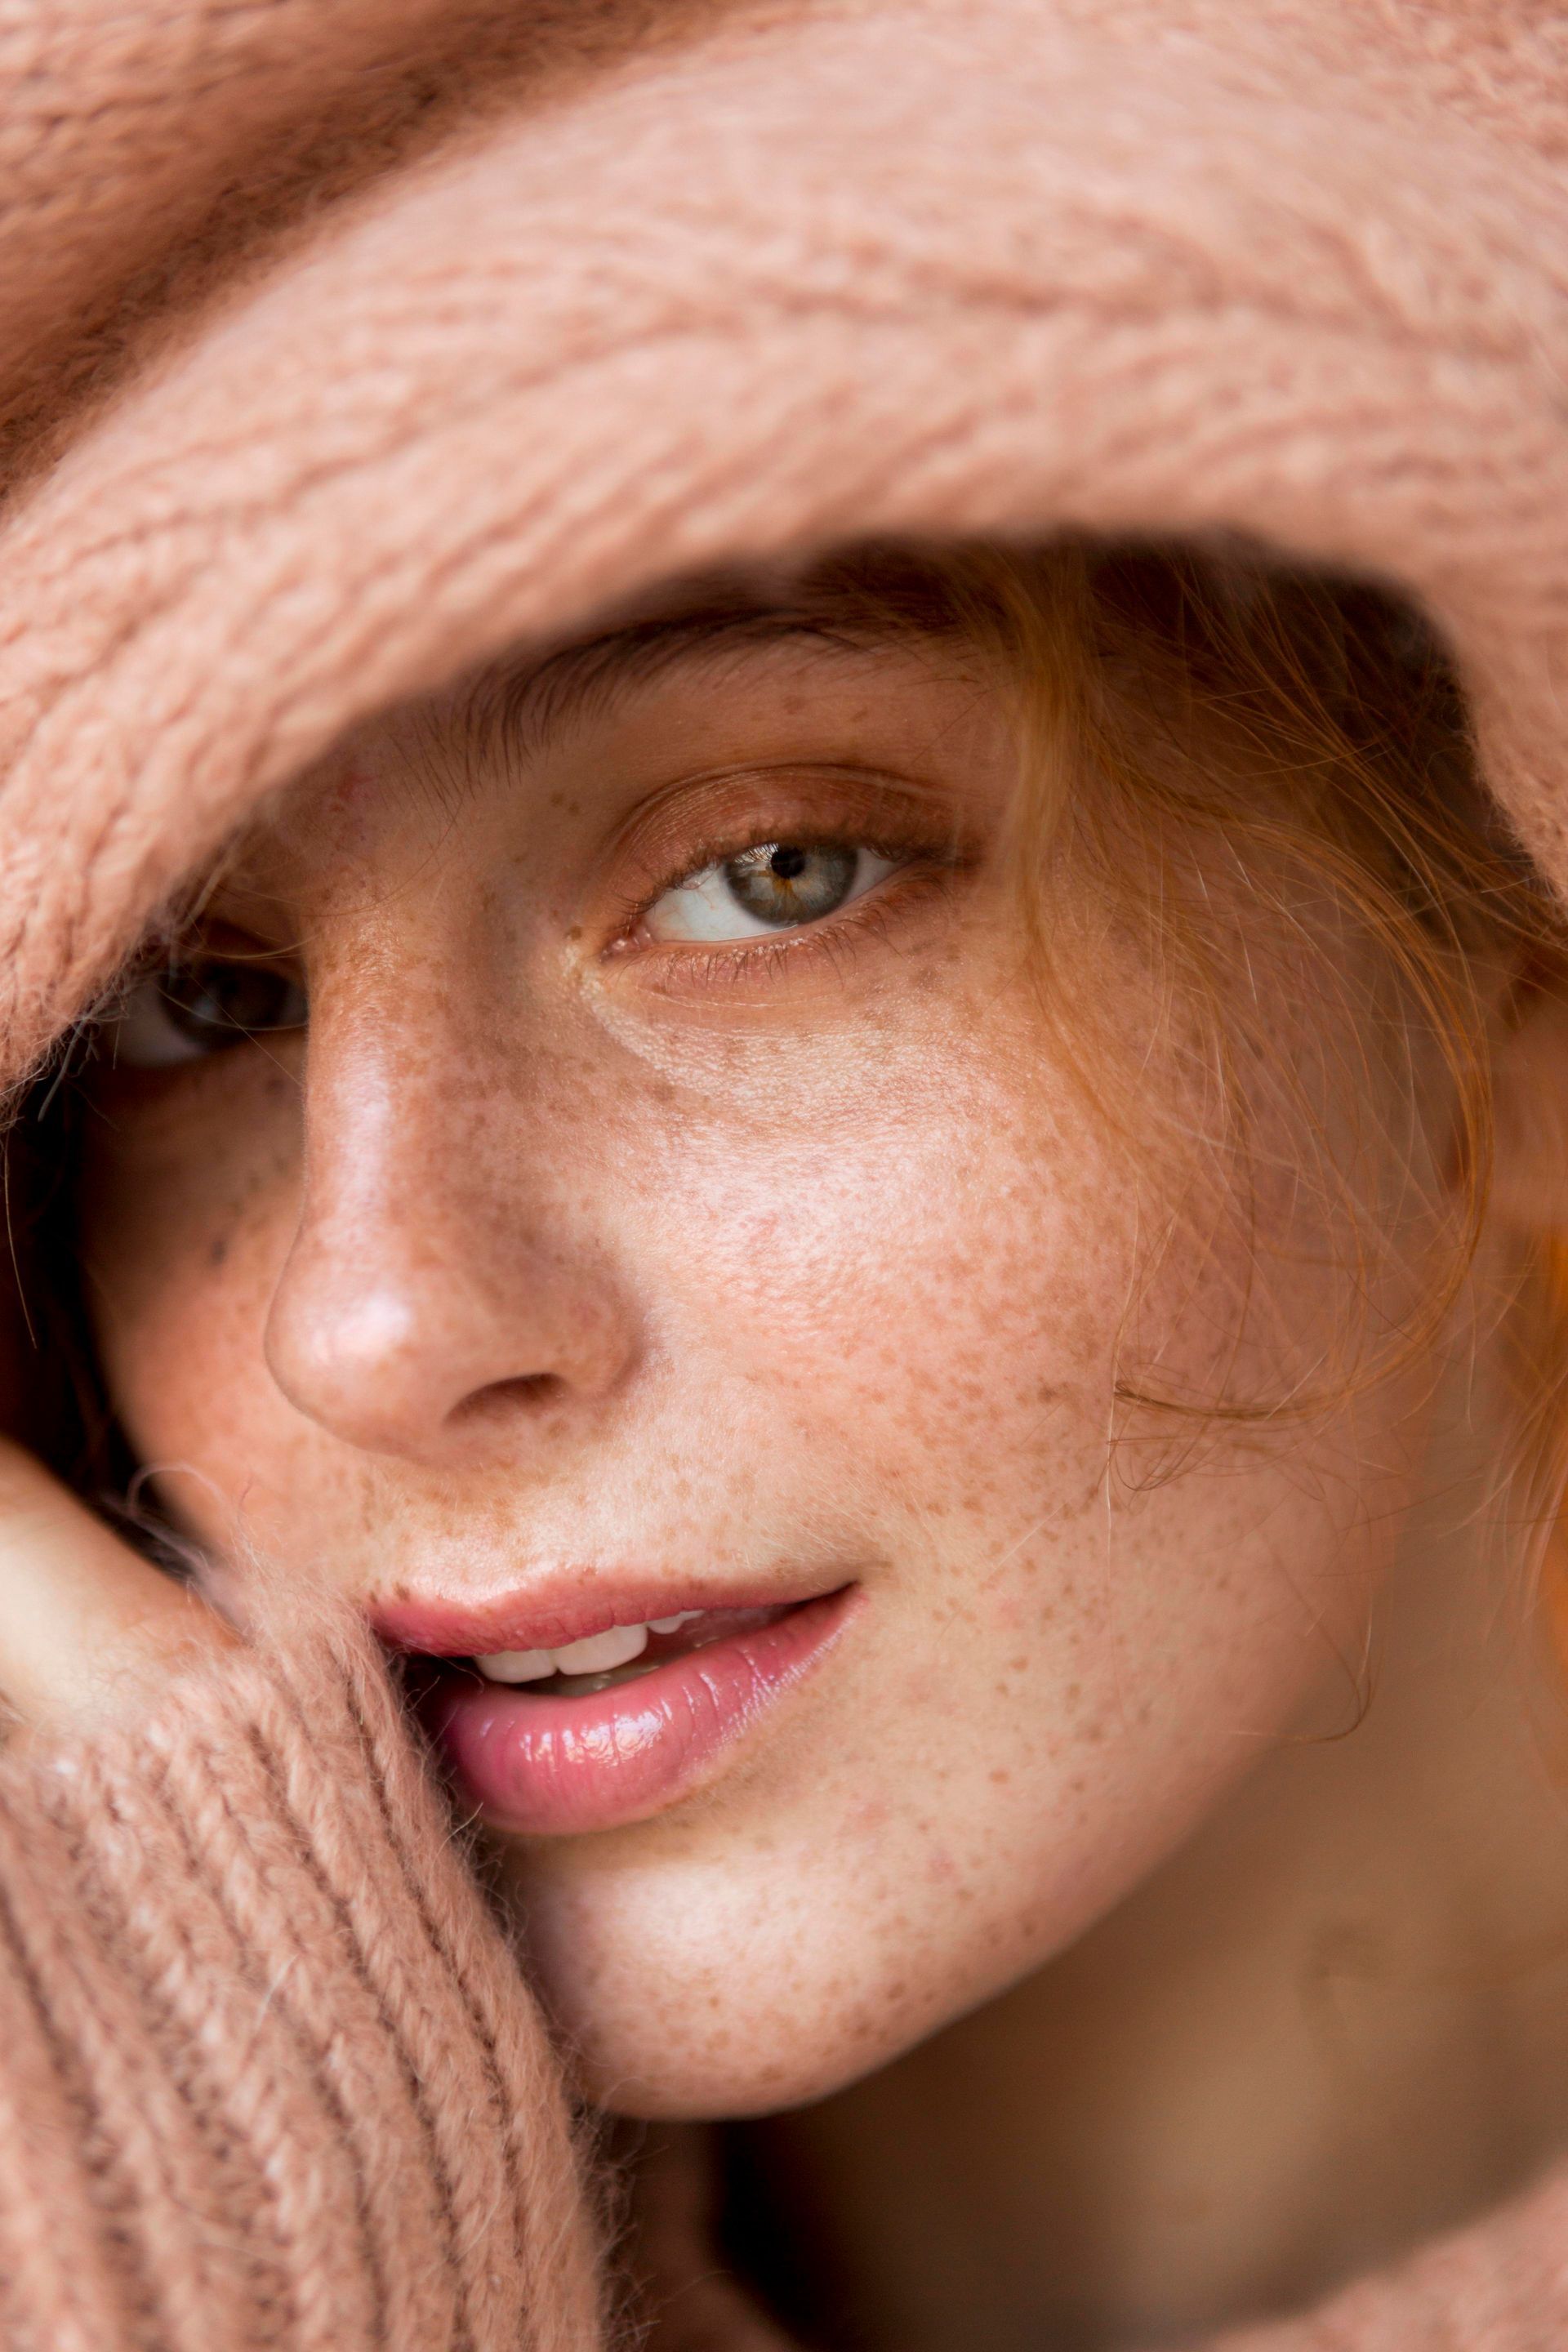 A close up of a woman 's face with freckles wearing a sweater and hat.